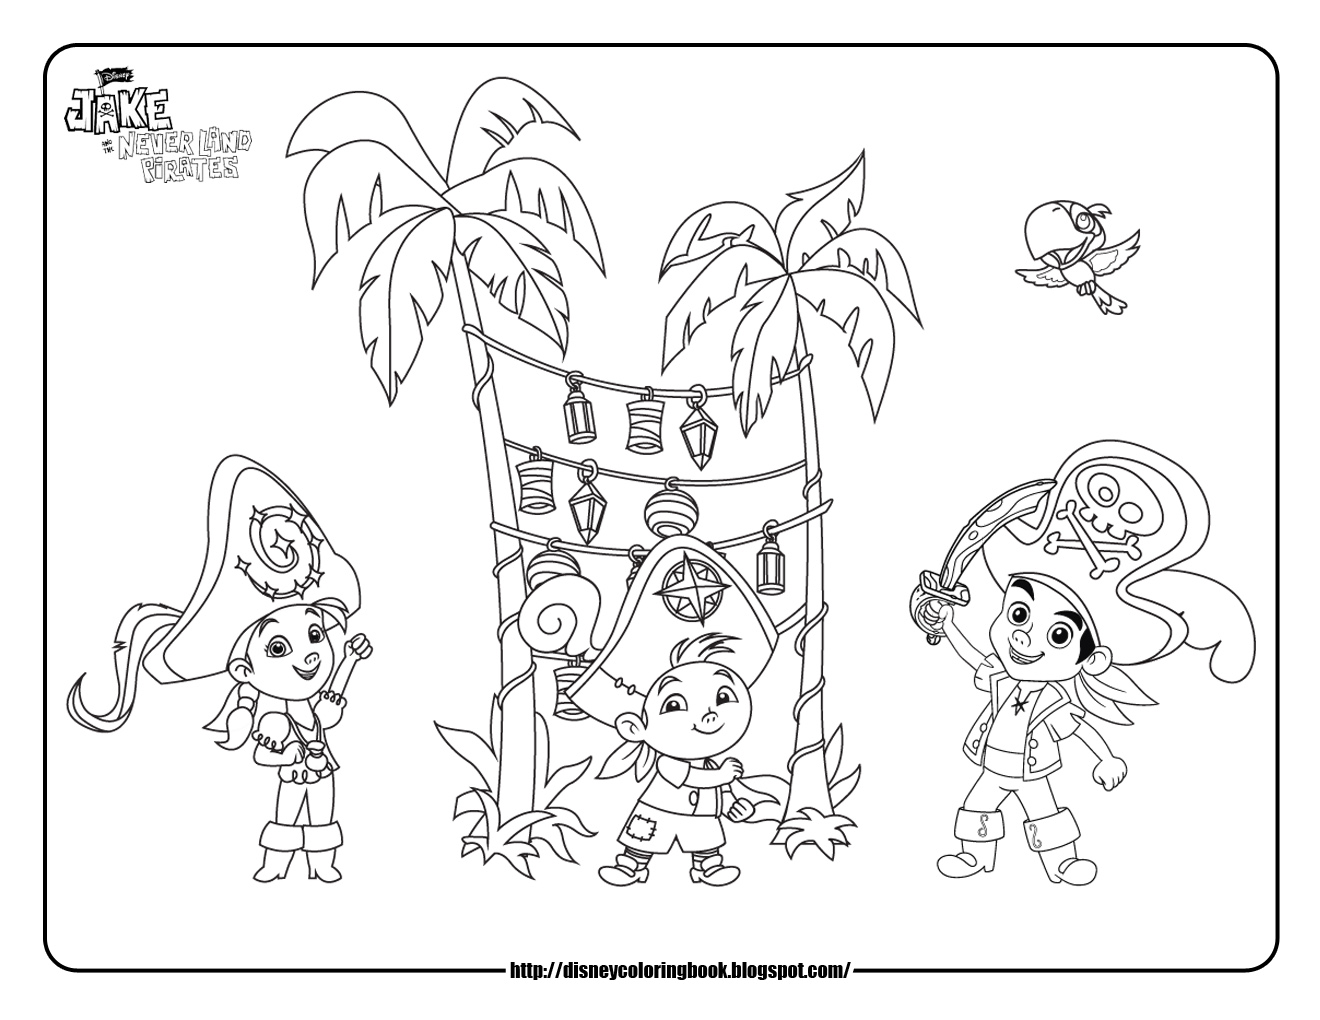 jake-and-the-neverland-pirates-3-free-disney-coloring-sheets-learn